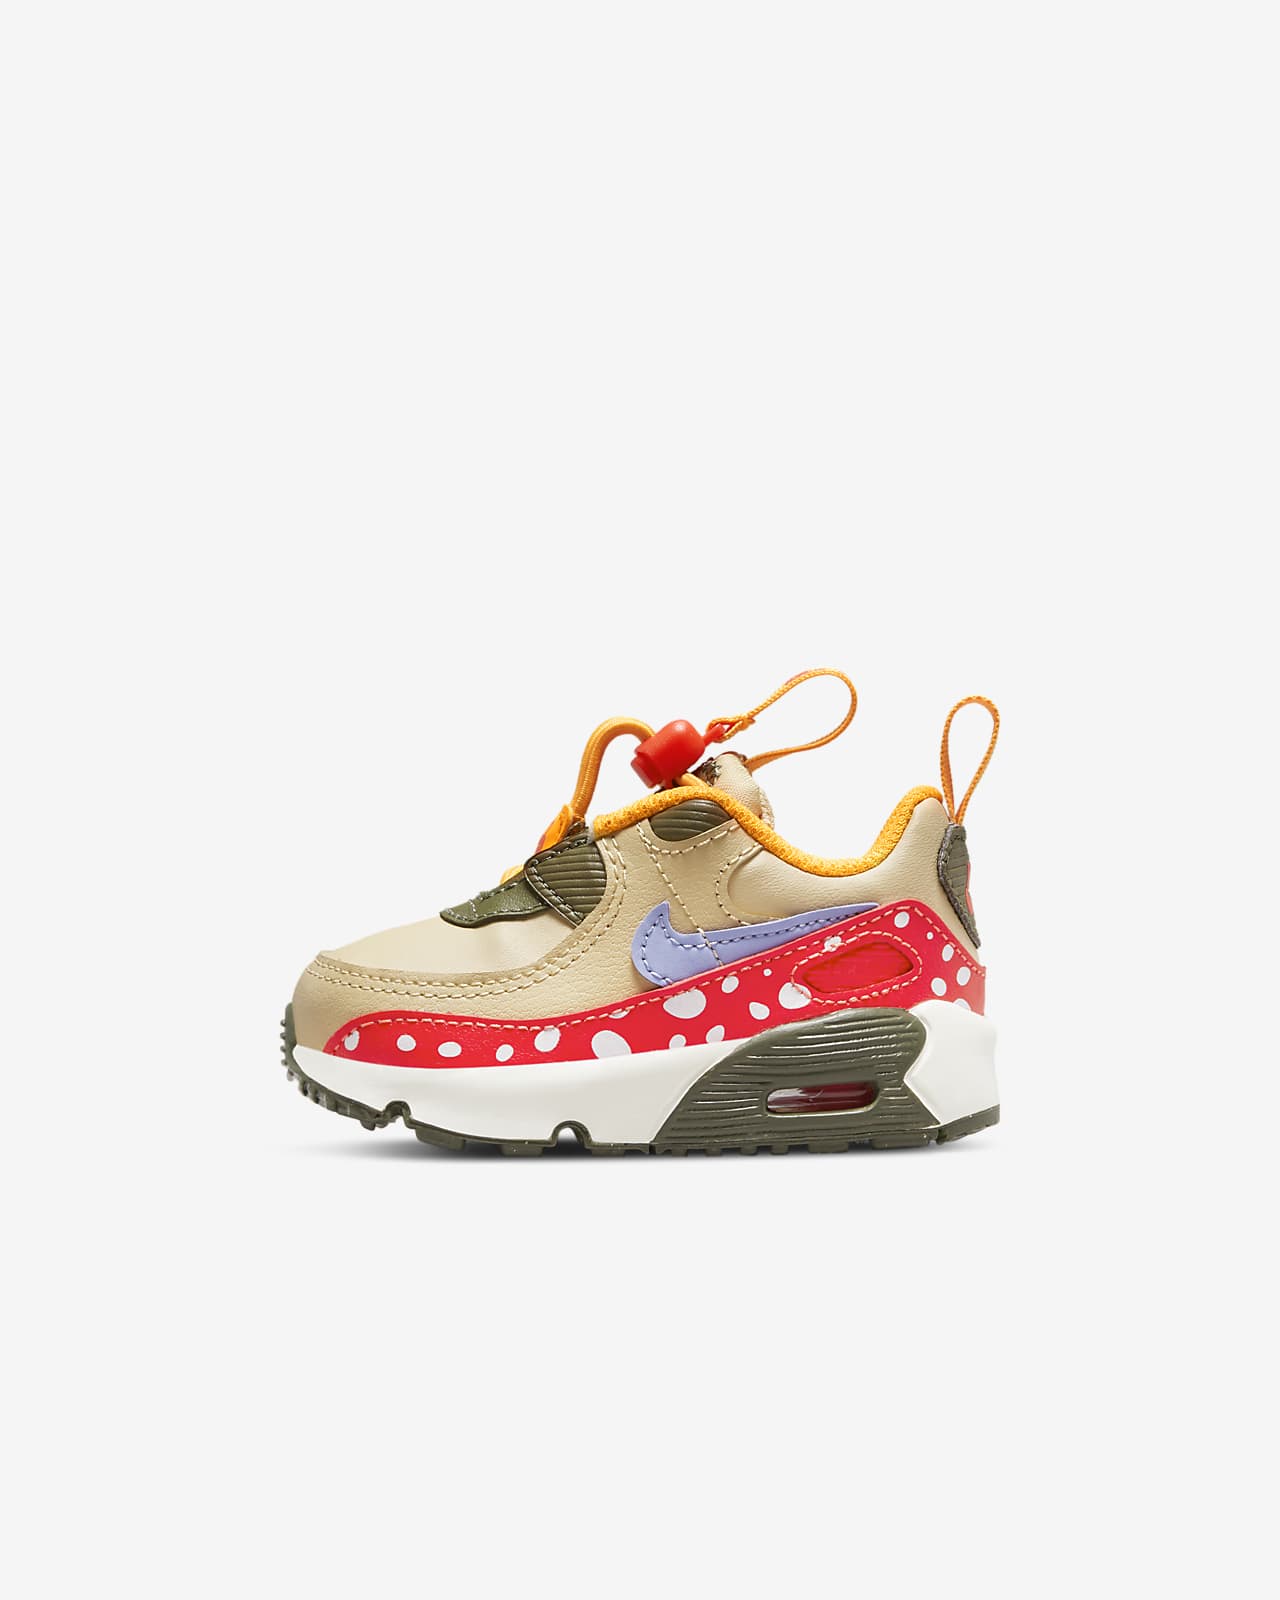 Nike Air Max 90 Toggle SE Baby/Toddler Shoes. Nike ID